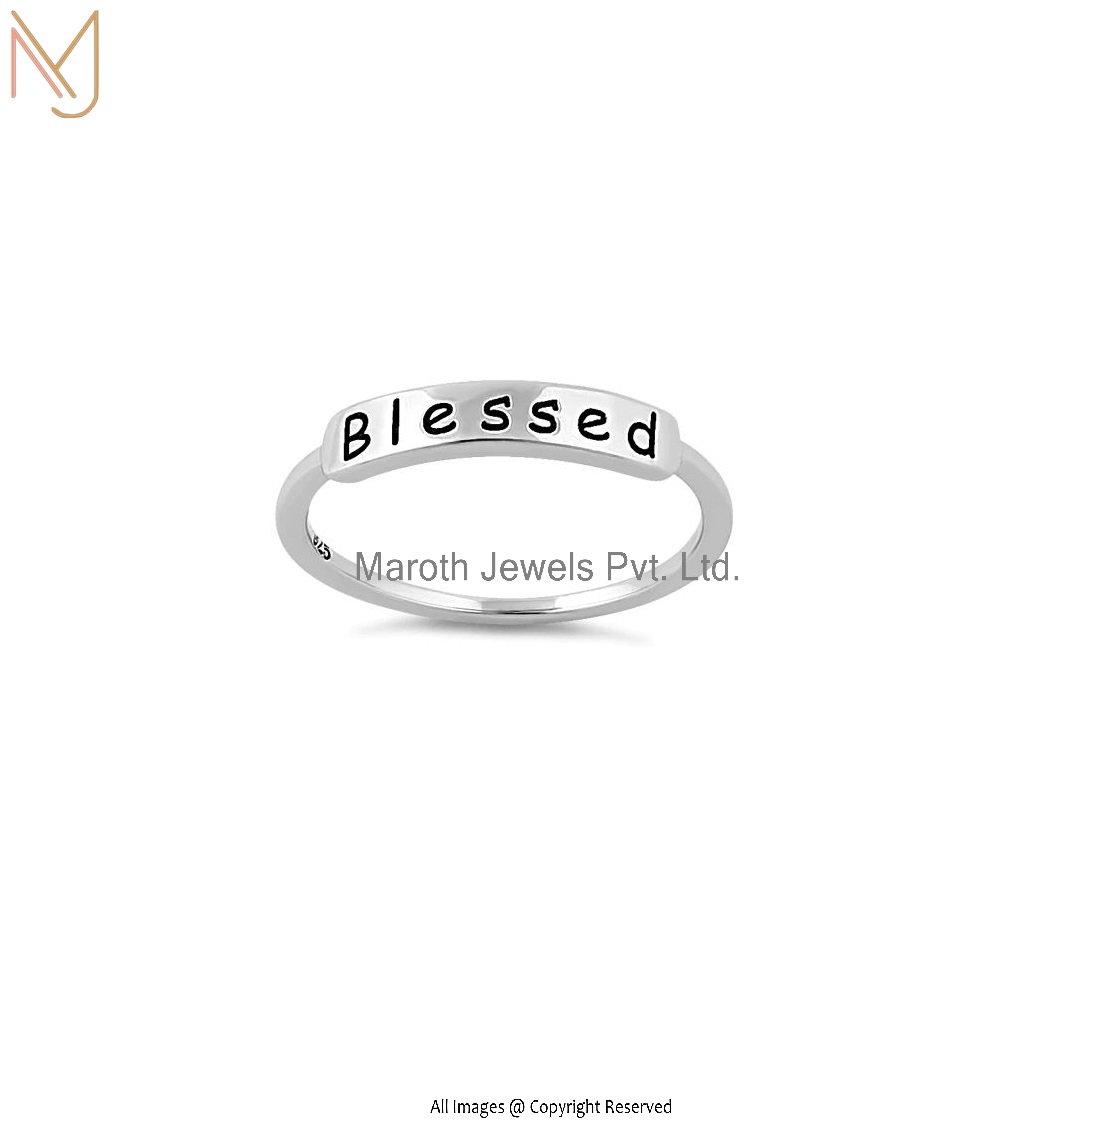 Private Label Sterling Silver "Blessed" Ring